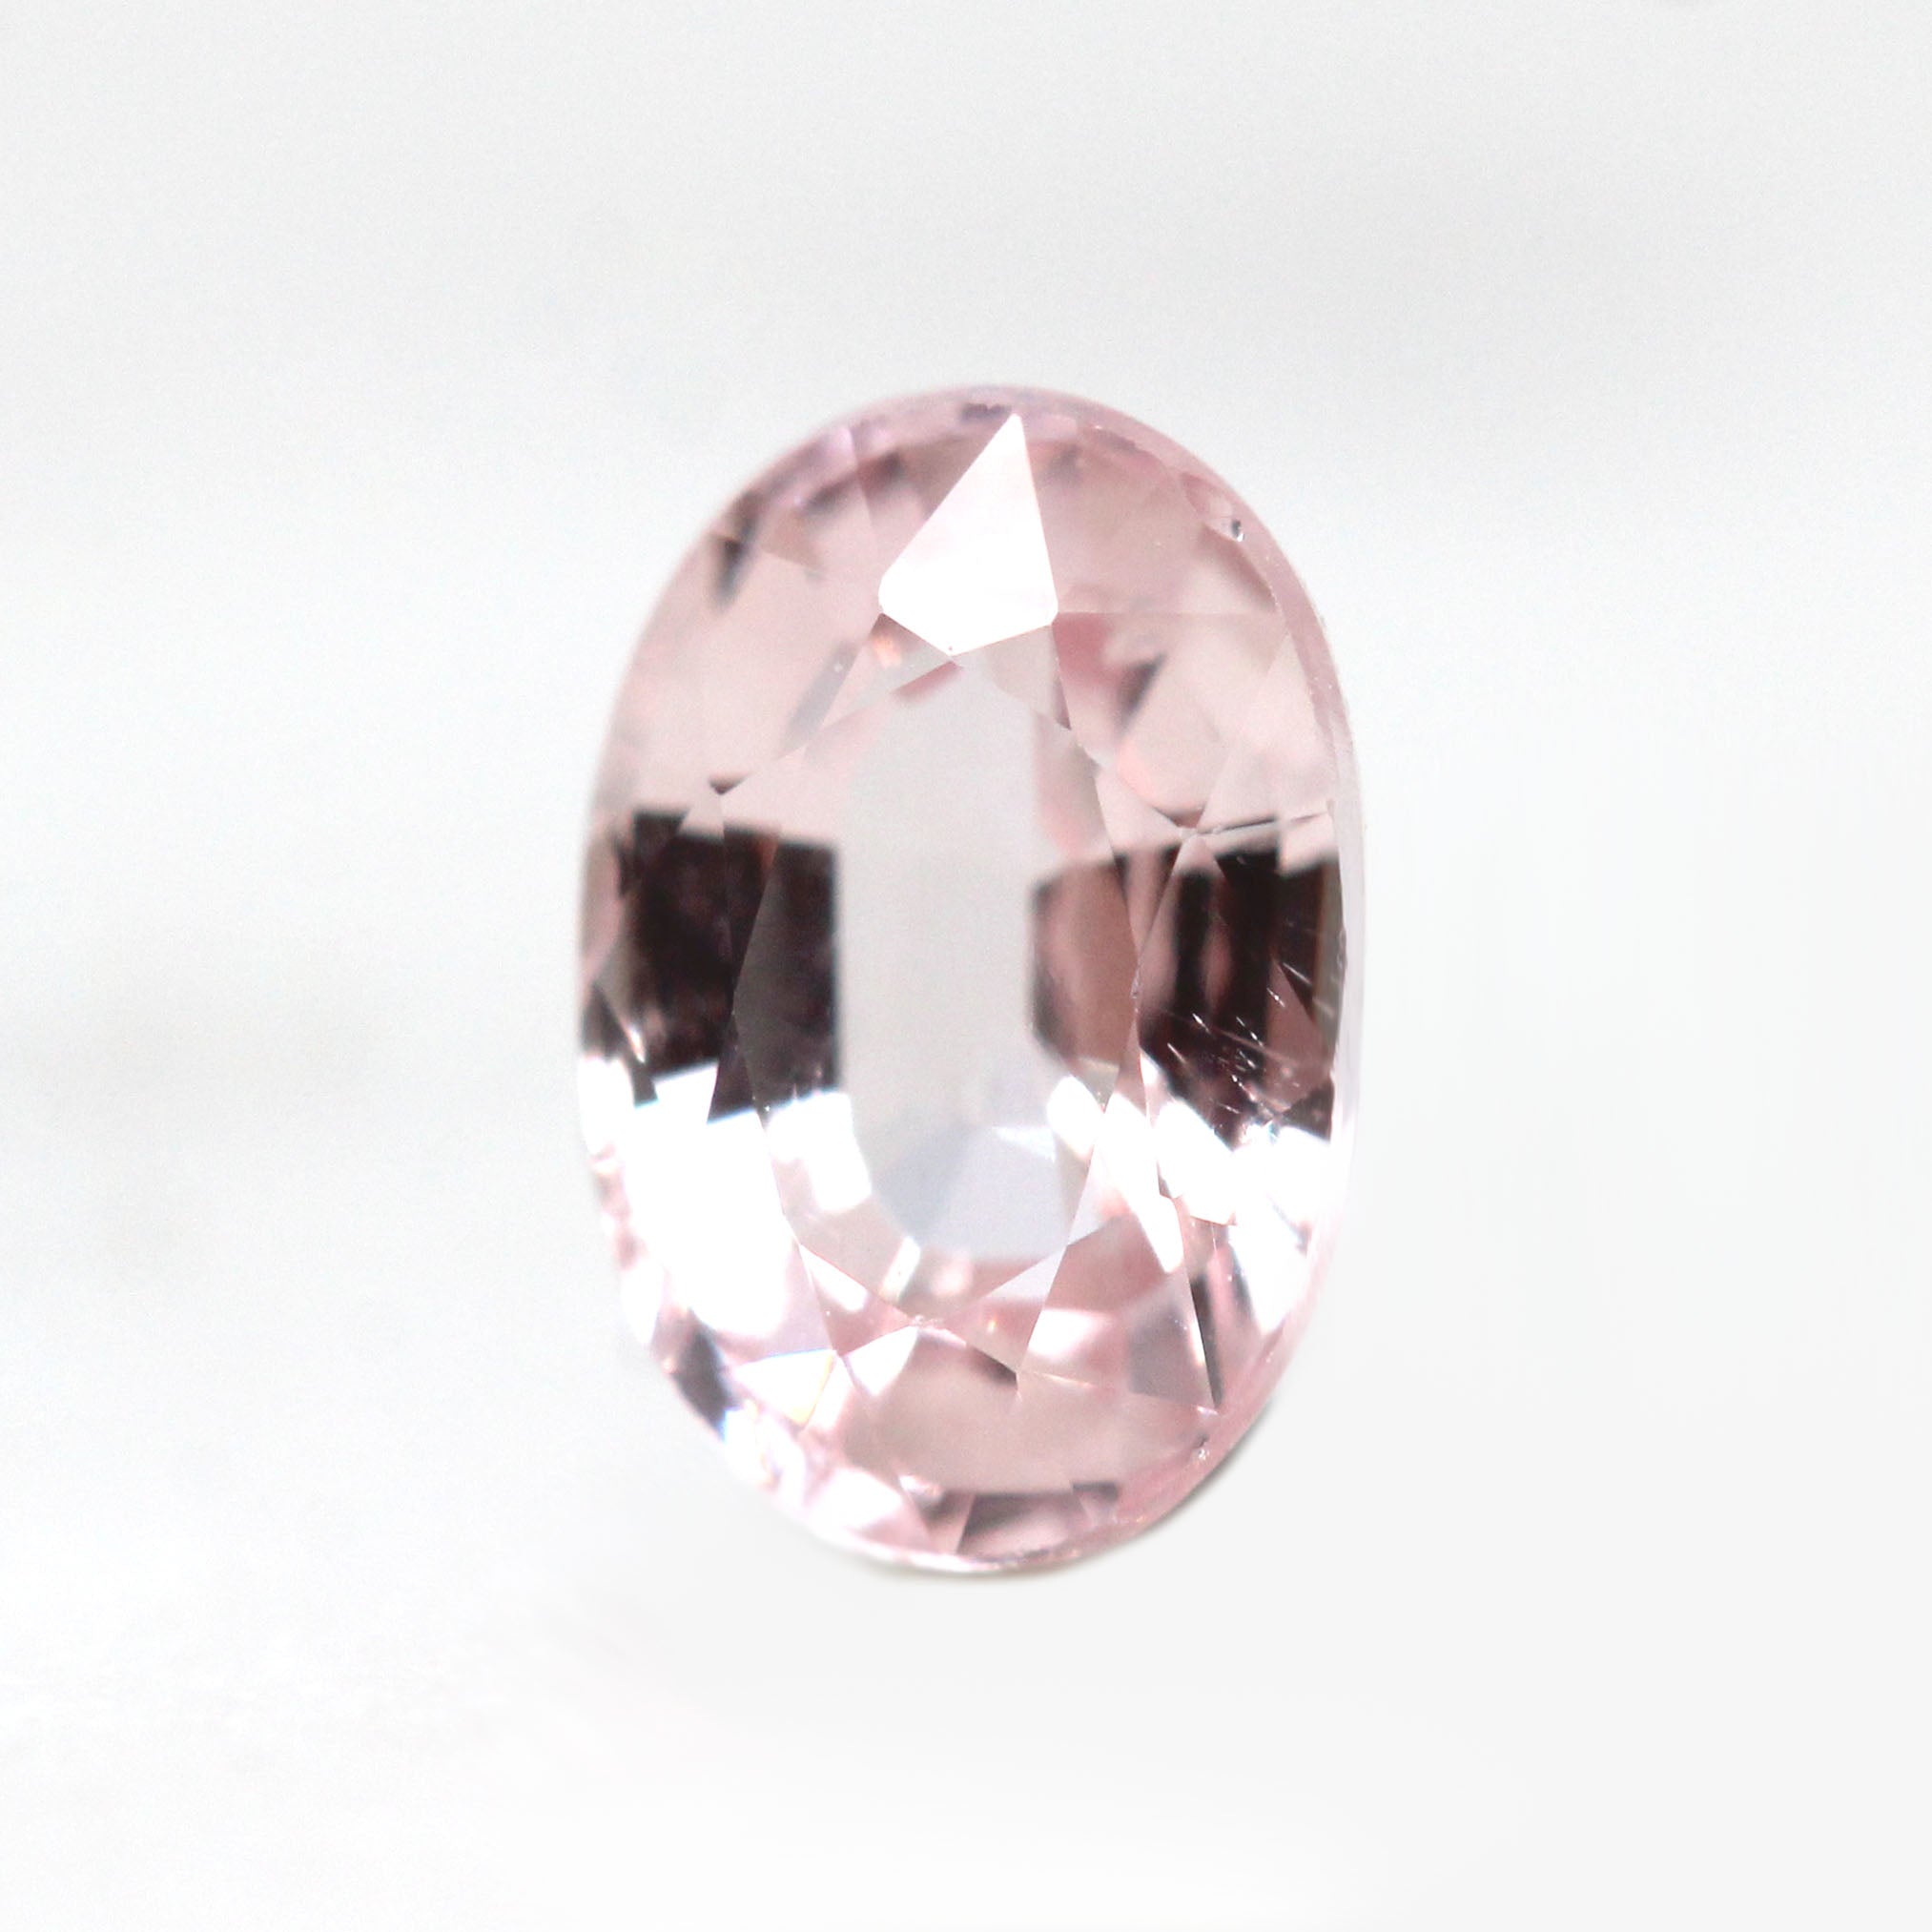 0.77 Carat Clear Light Pink Oval Montana Sapphire for Custom Work -  Inventory Code PSO077